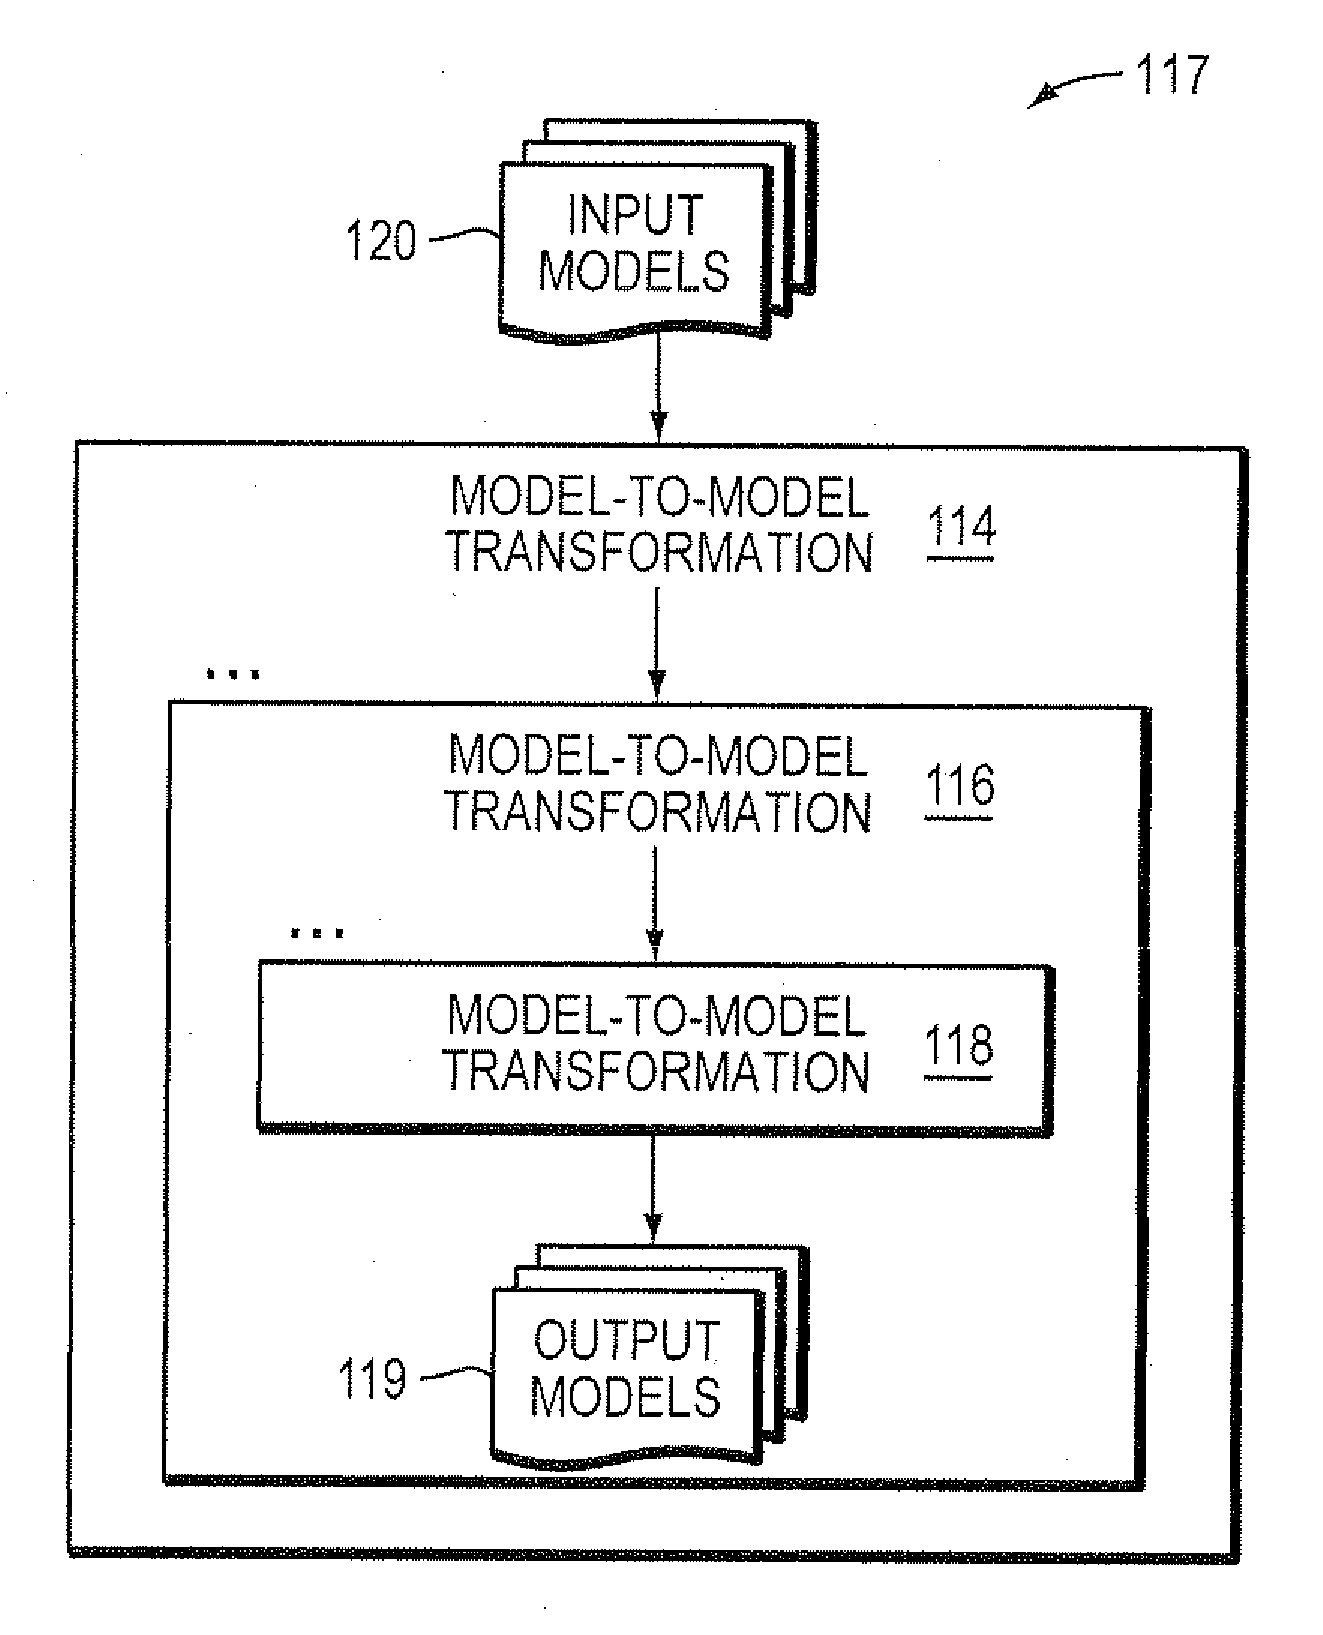 Computer Method and Apparatus for Chaining of Model-To-Model Transformations